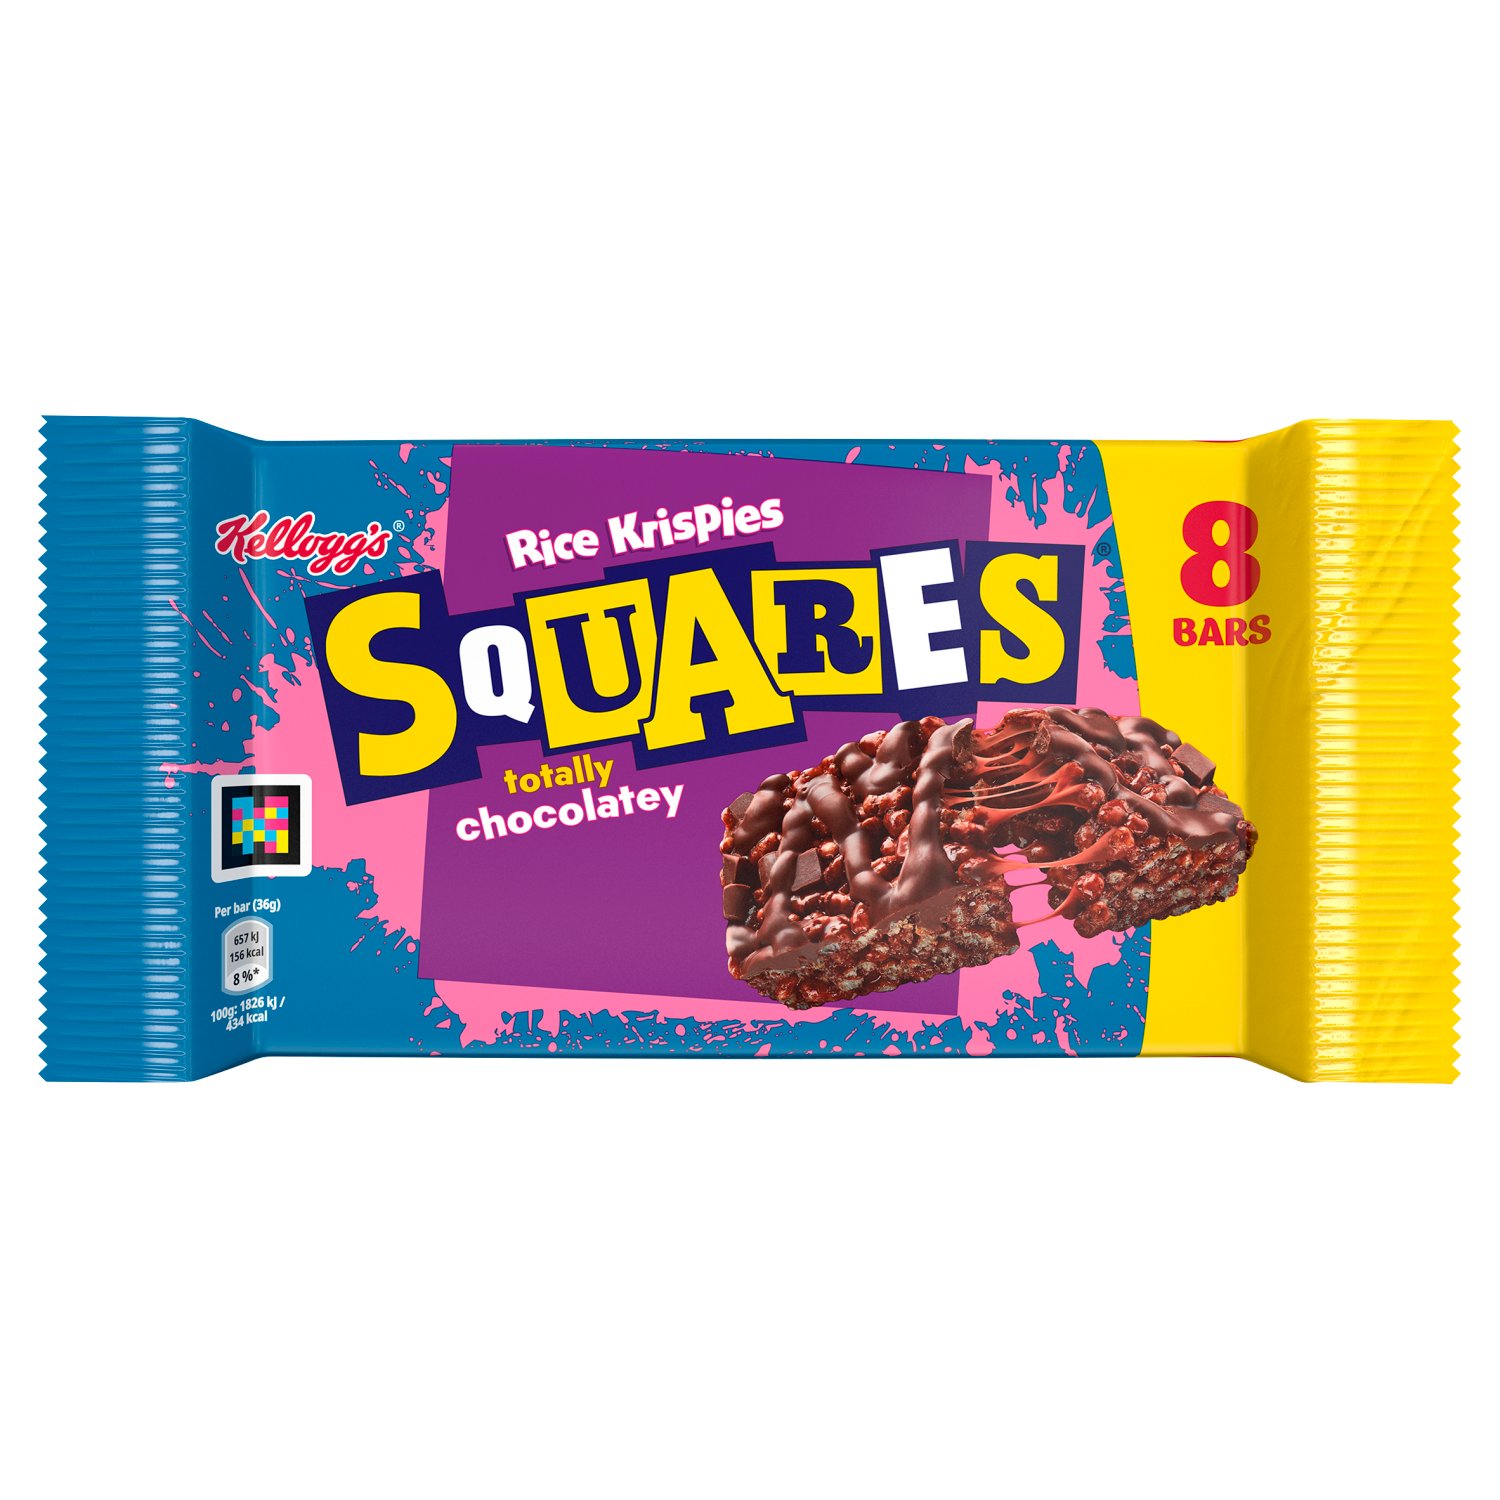 Rice Krispies Squares Totally Chocolate 8 Pack (36 g)